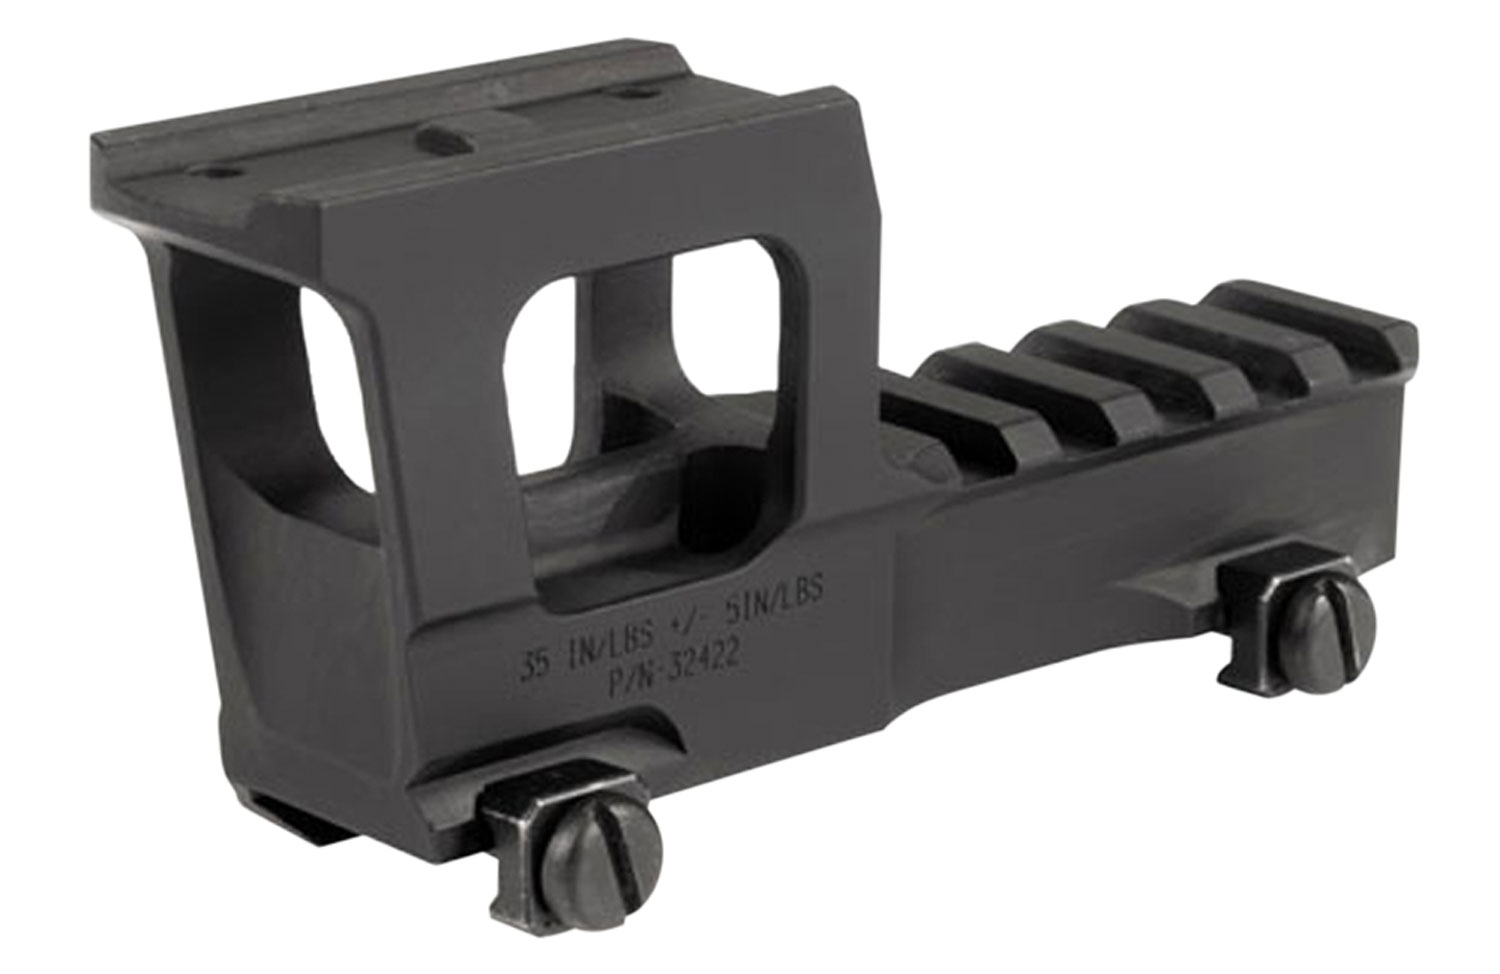 KAC AIMPOINT NVG MOUNT